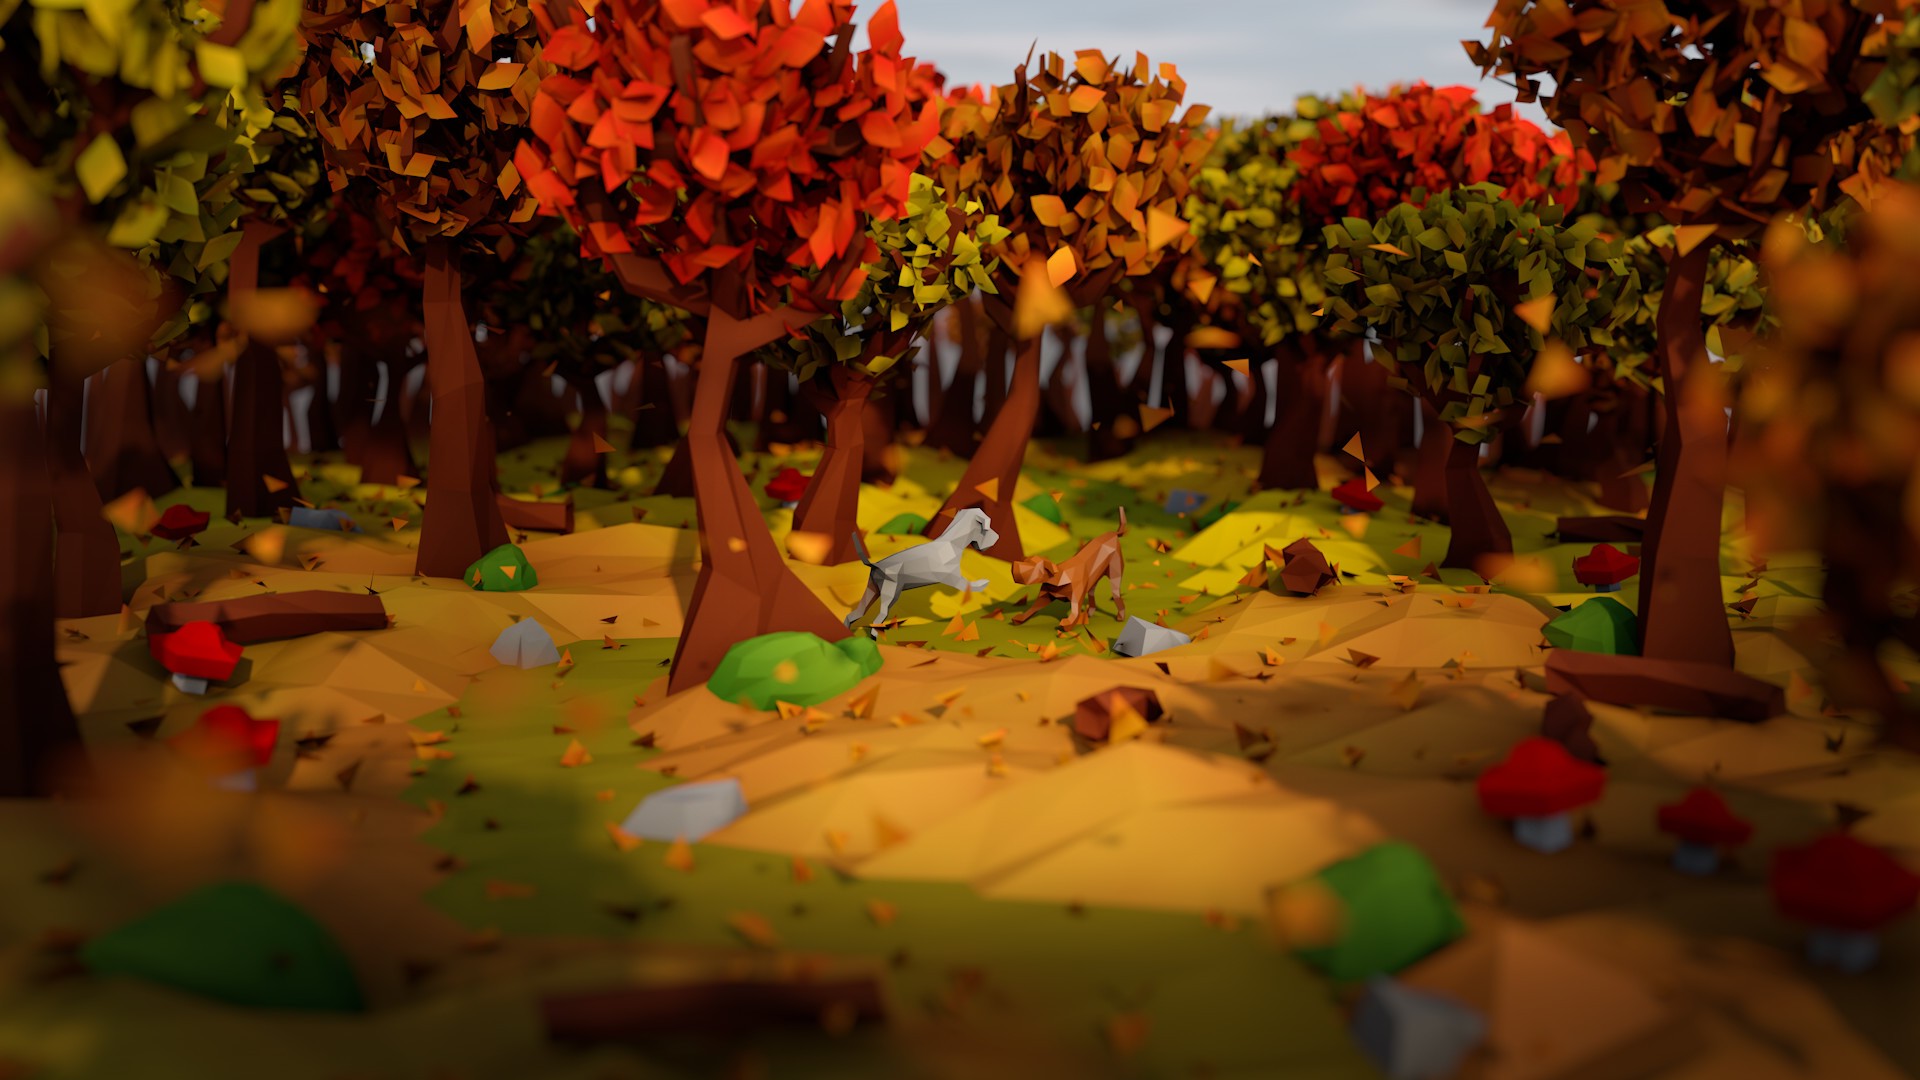 artwork, Digital Art, Low Poly, Nature, Forest, Trees, Dog, Animals